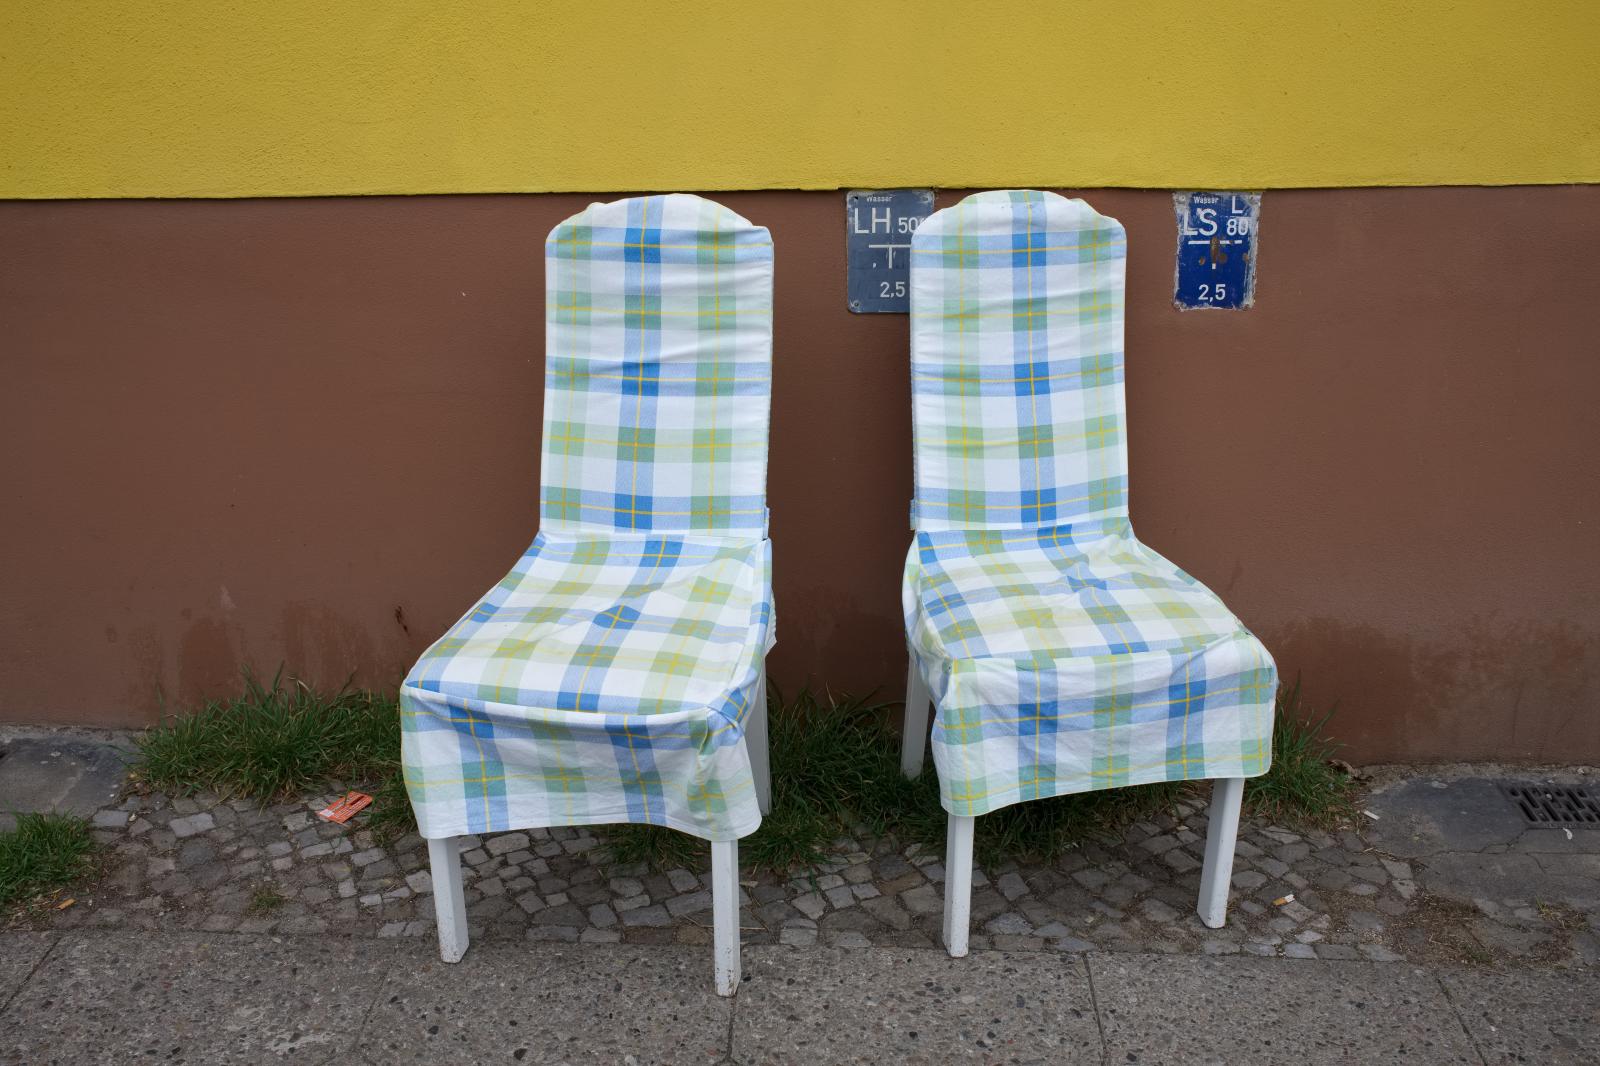 Chairs | Buy this image